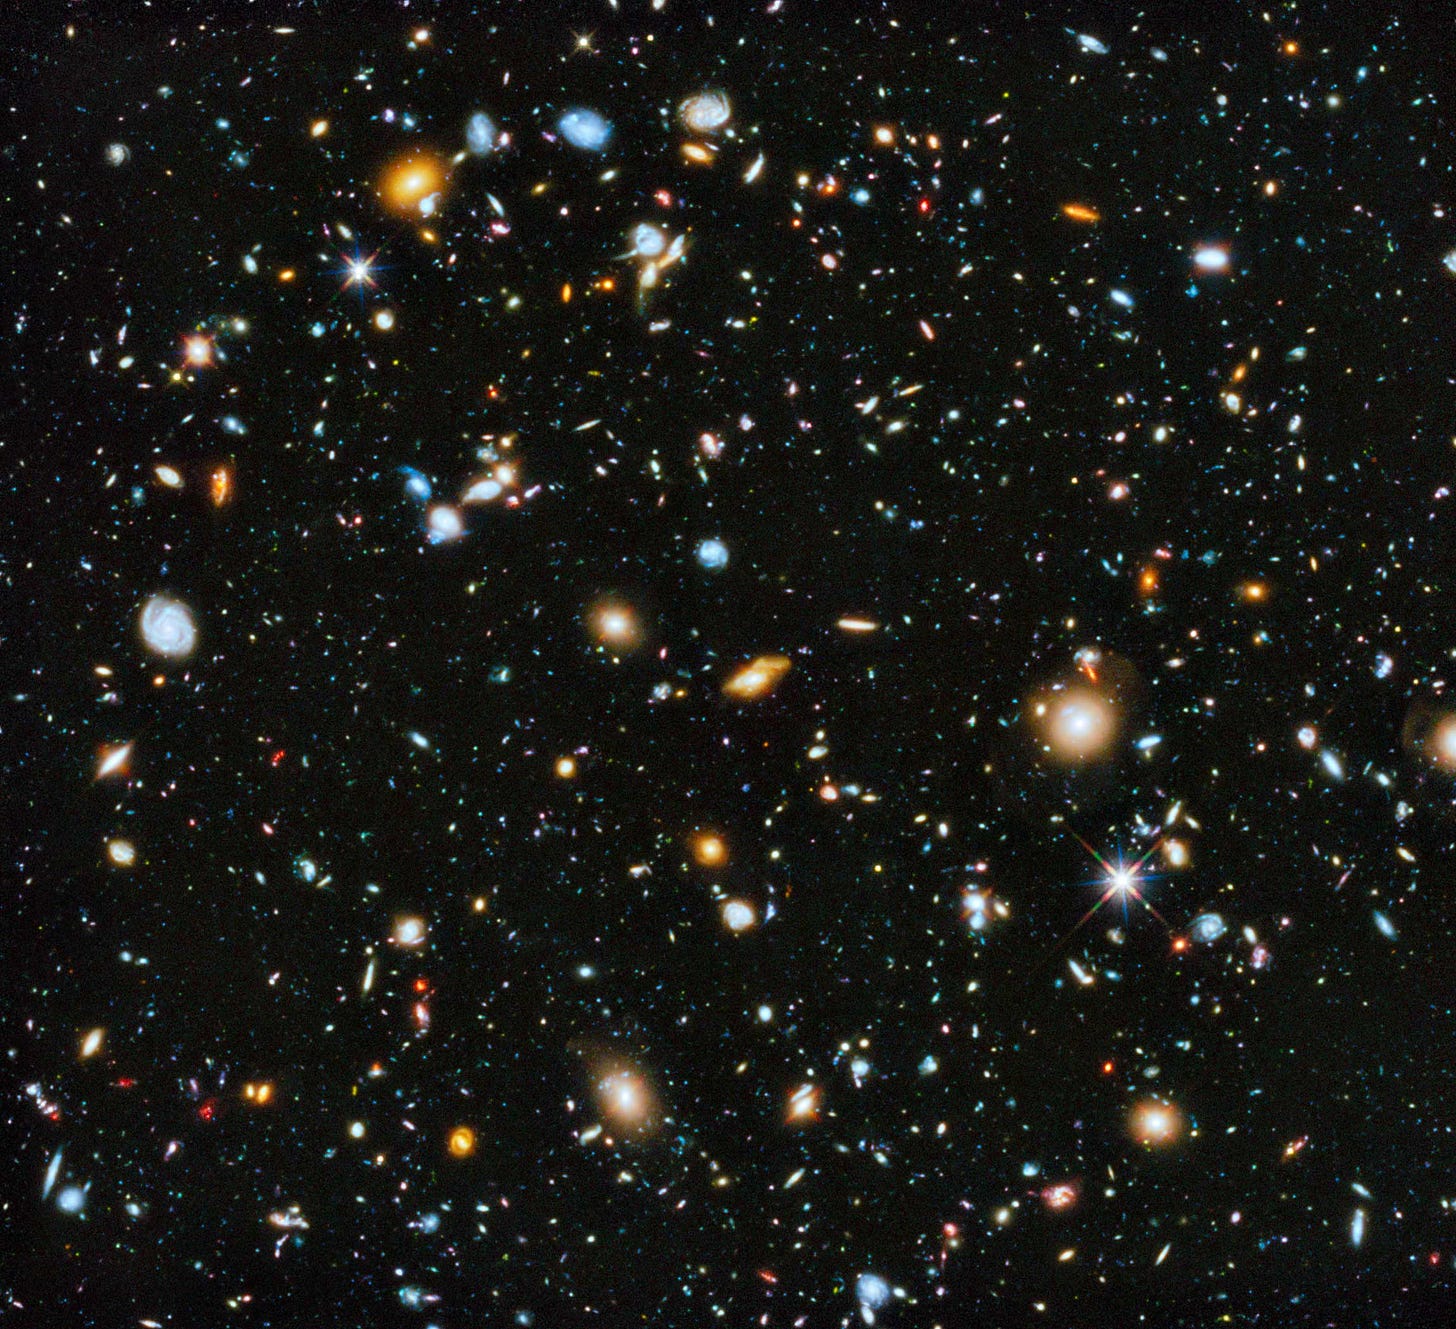 Among Hubble's most colorful deep space images ever captured